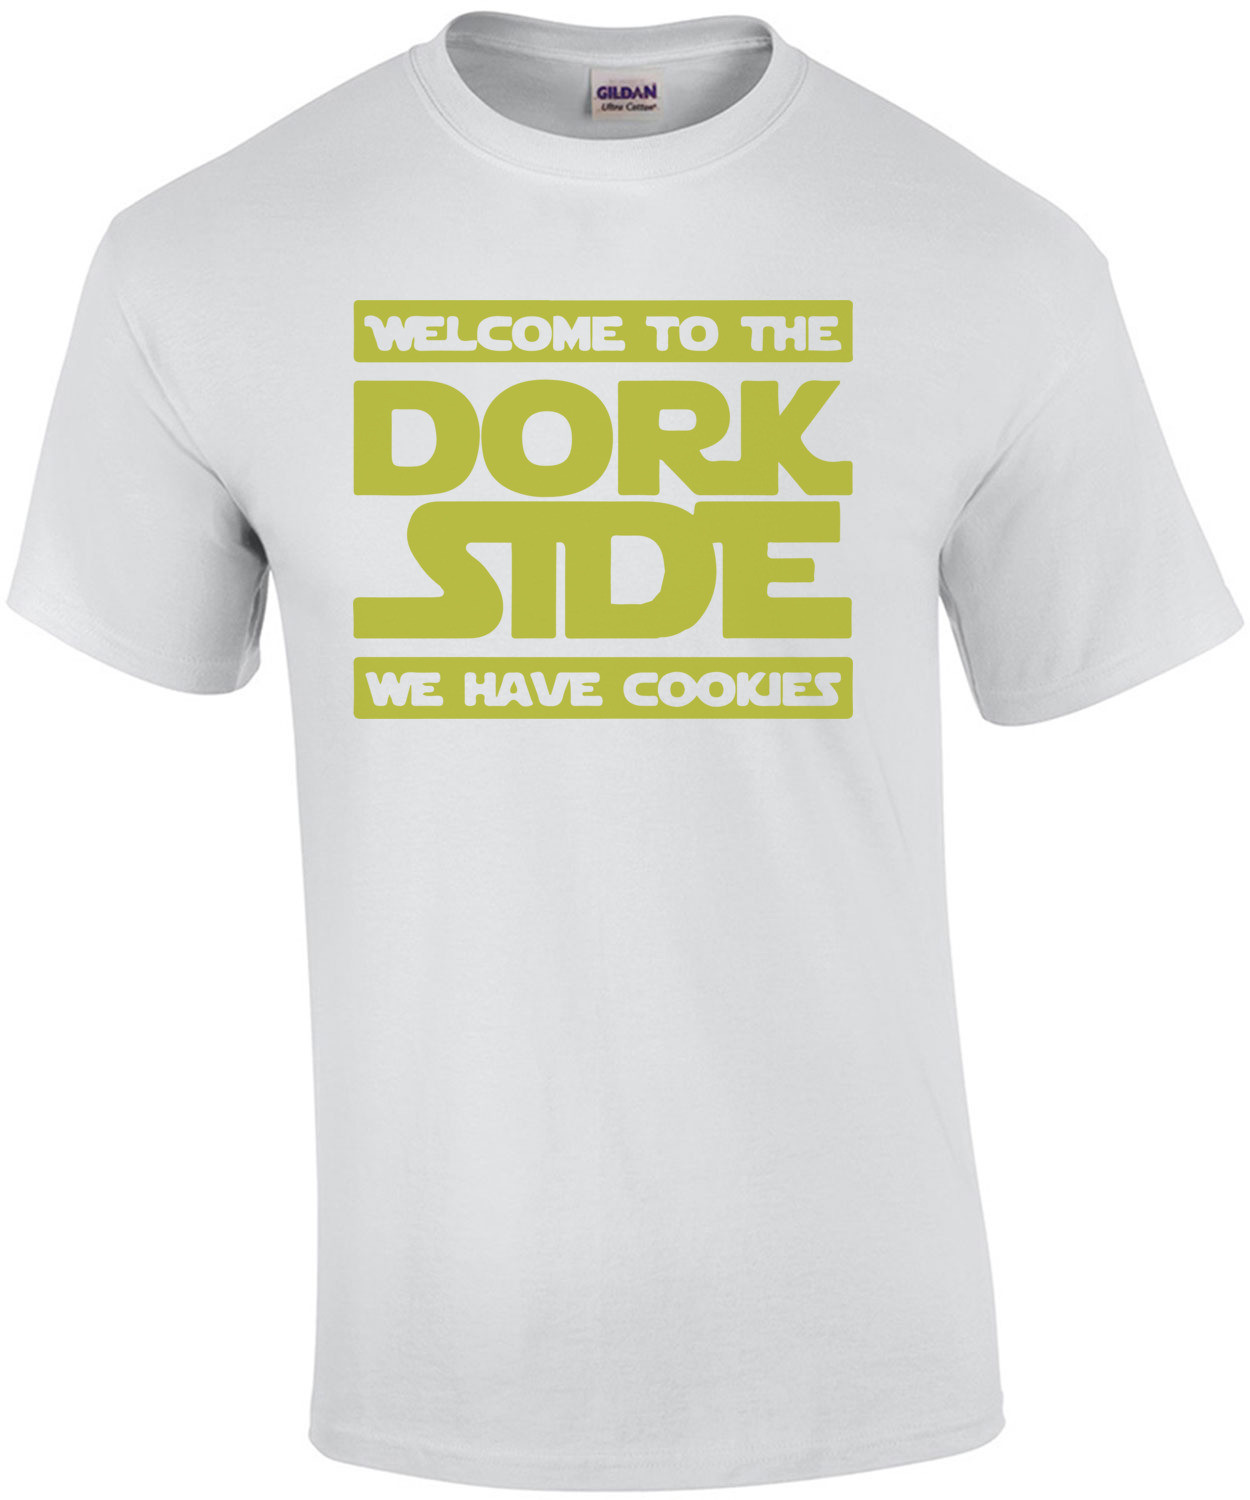 Star Wars Parody - Welcome to the dork side - we have cookies t-shirt